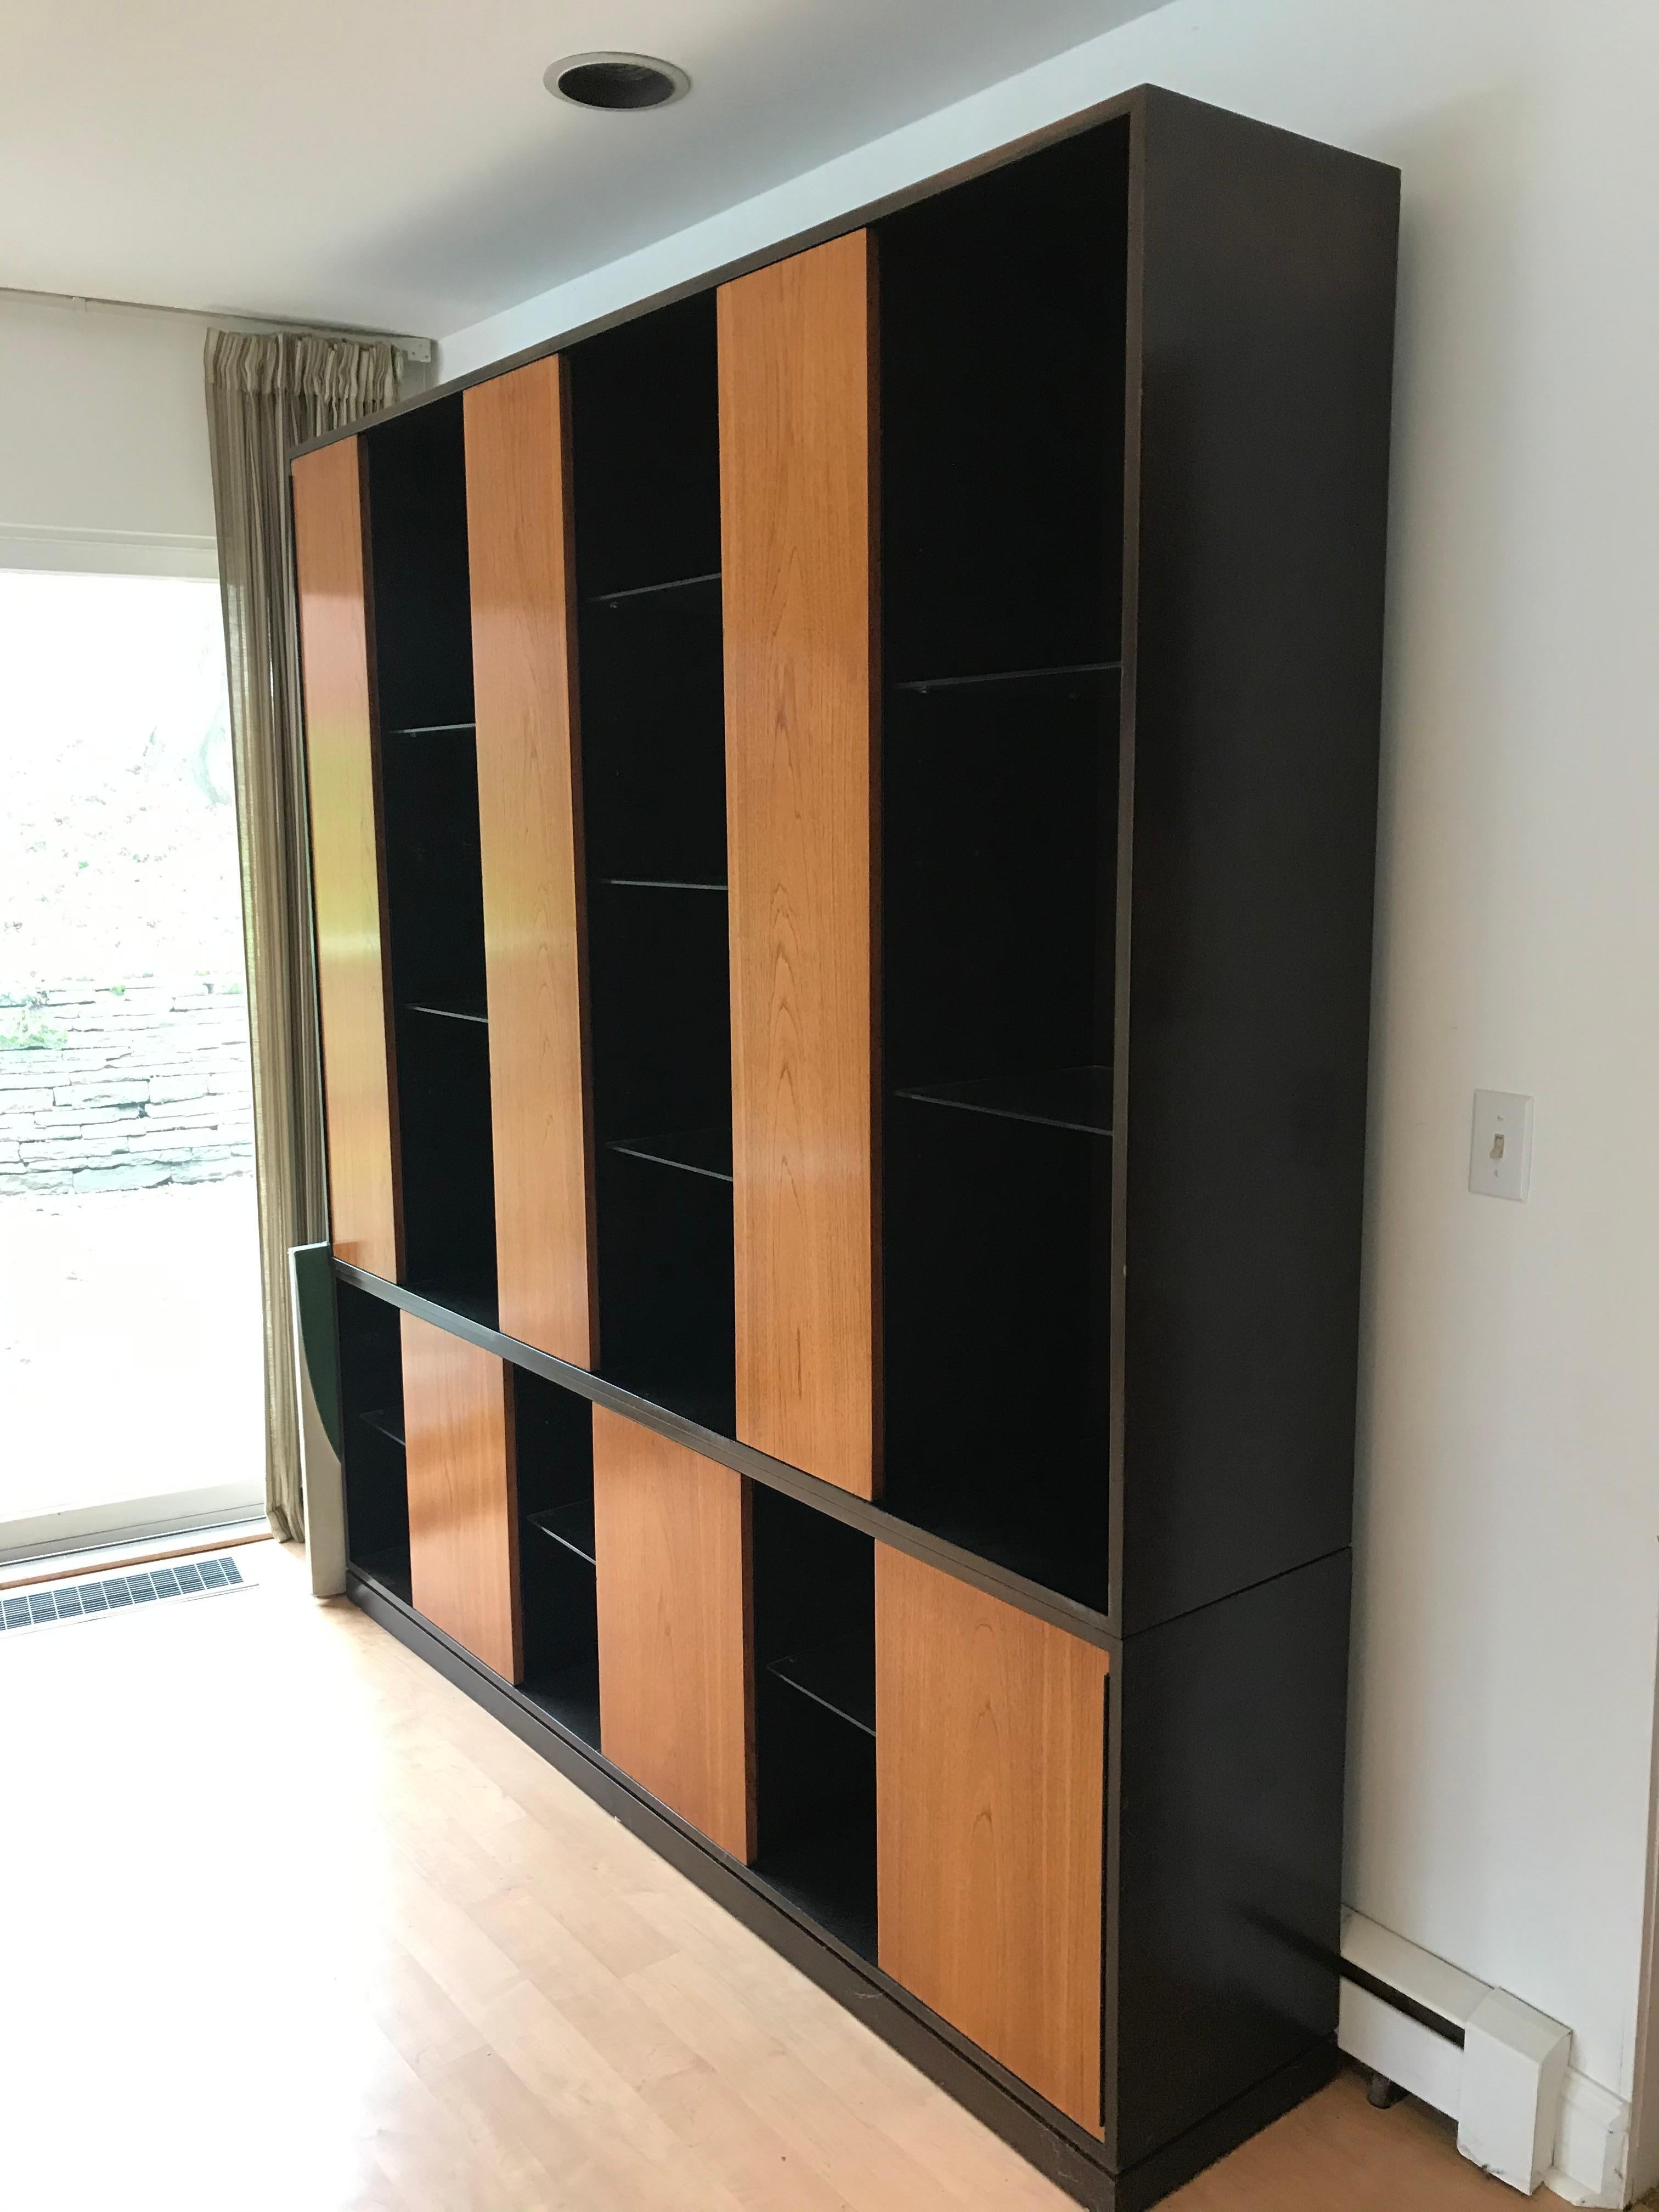 Ebonized Monumental Harvey Probber Cabinet with Doors and Shelves with Alternating Woods